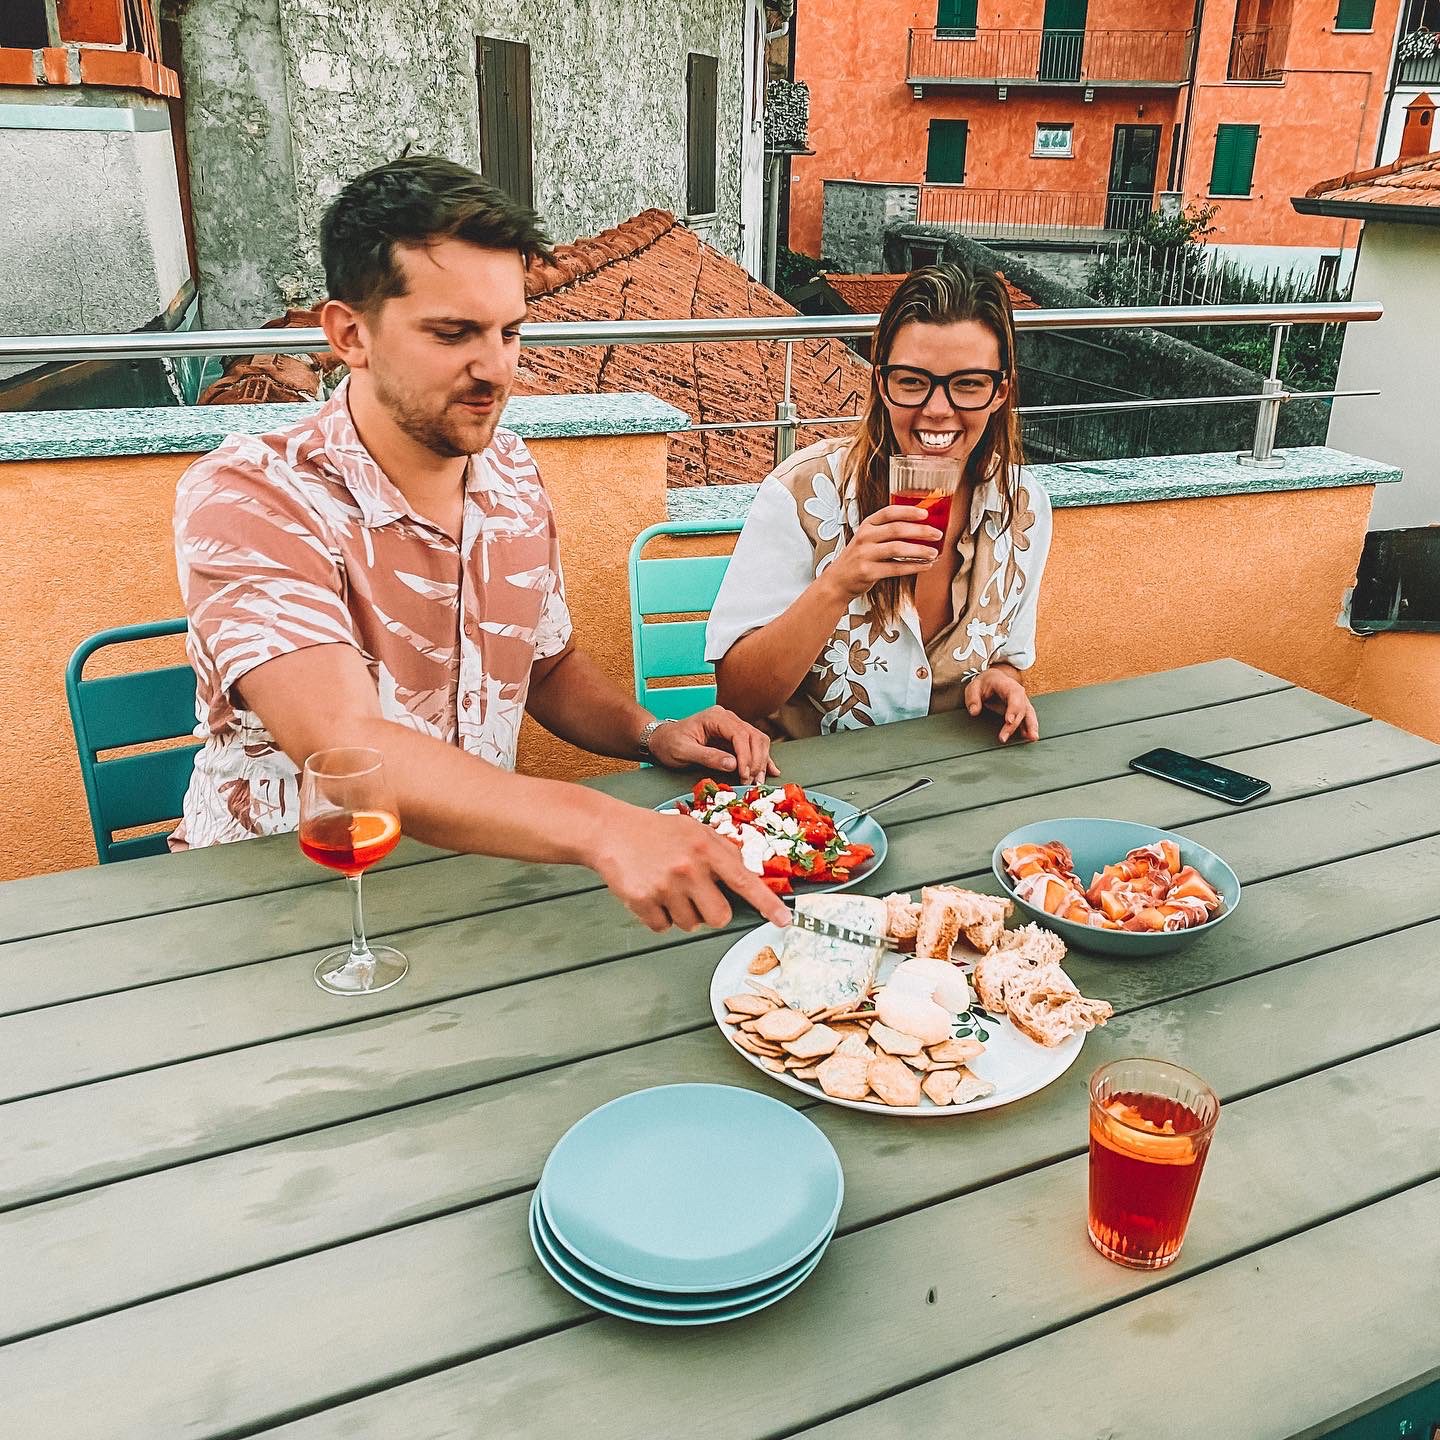 Two people drinking campari spritz on a balcony with a table in the foreground full of cheese, bread, salads and melon.